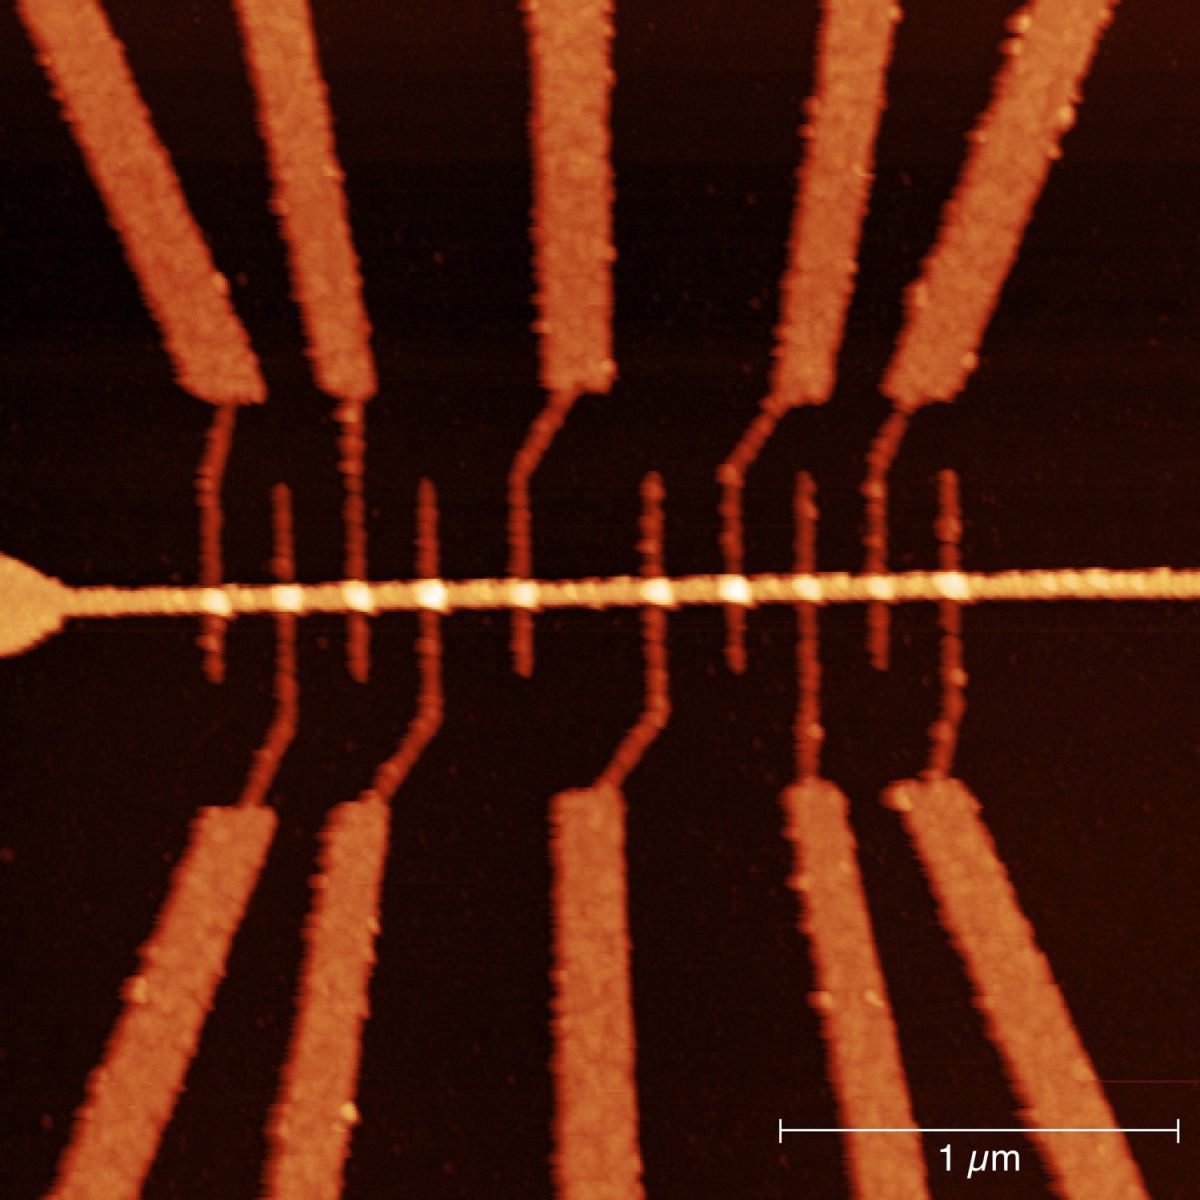 New method to detect defects in transistors